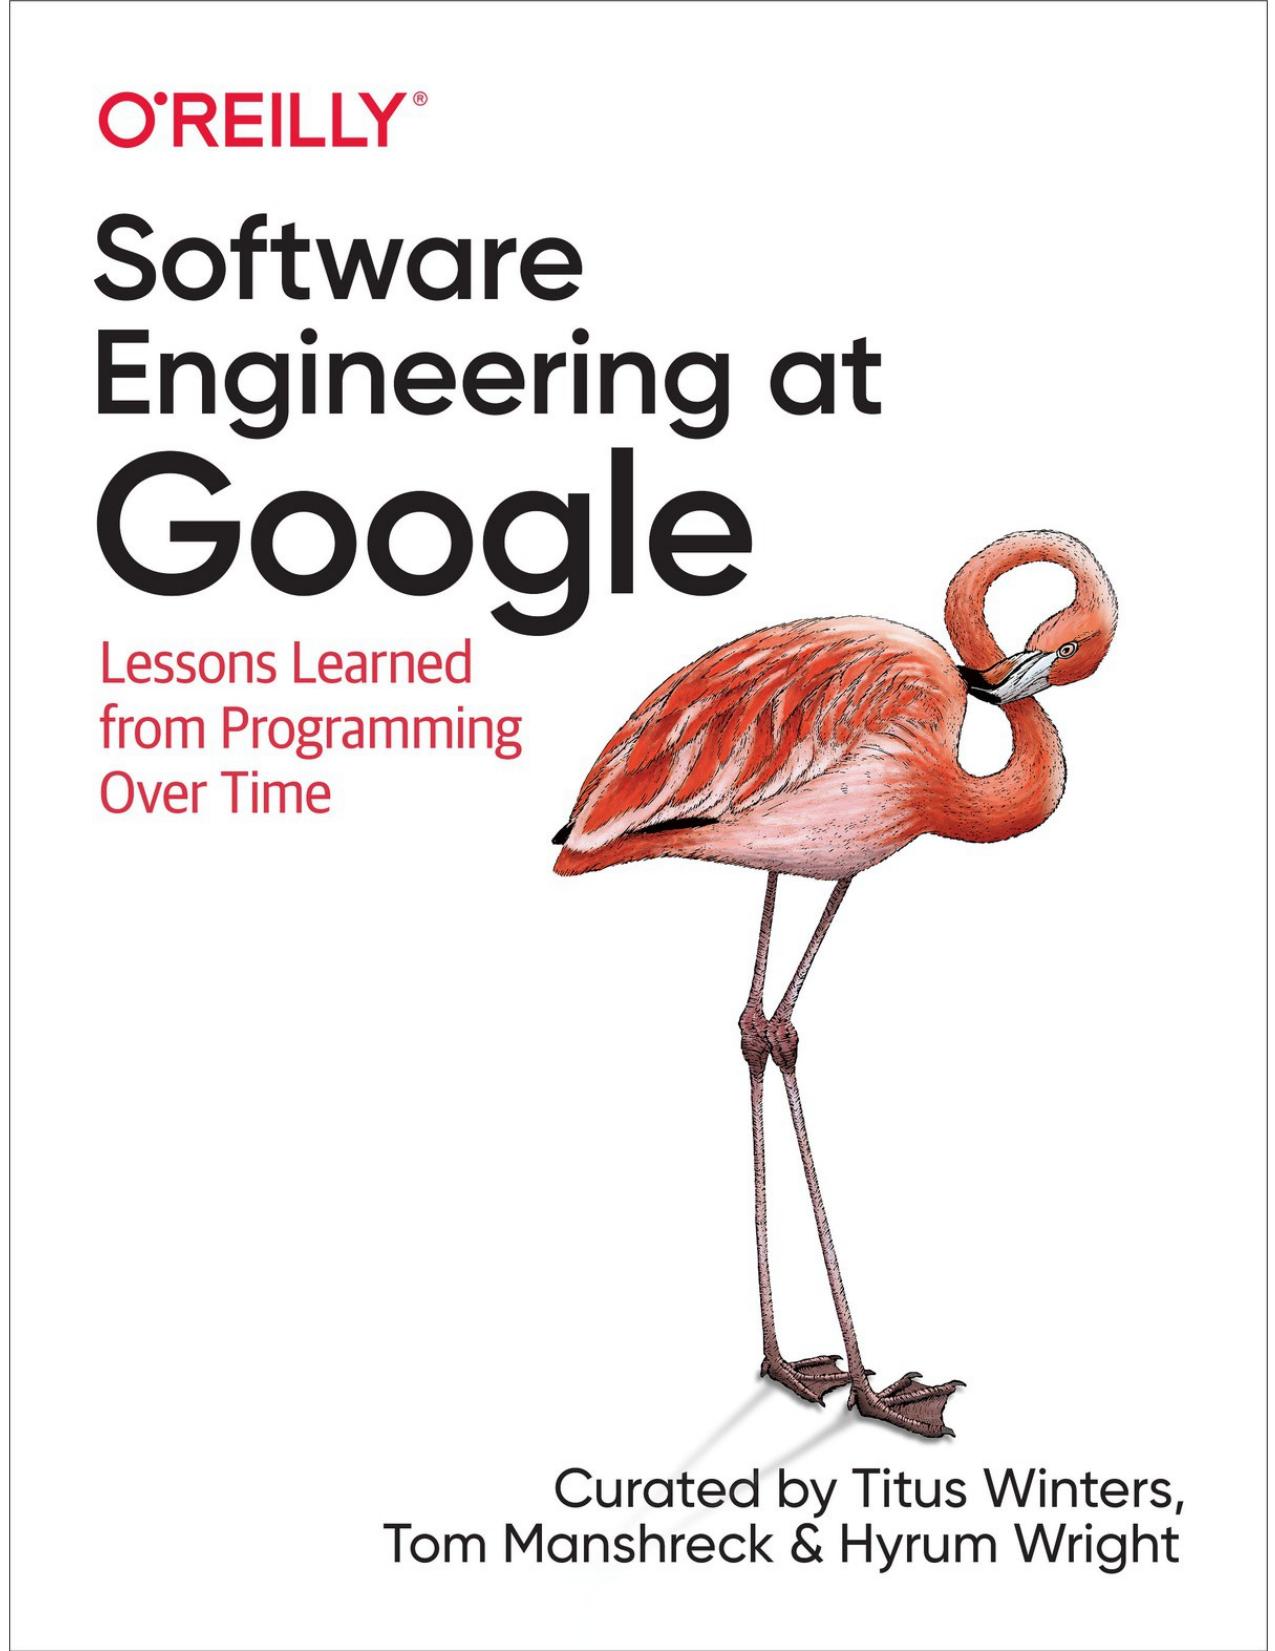 Software Engineering at Google by Titus Winters